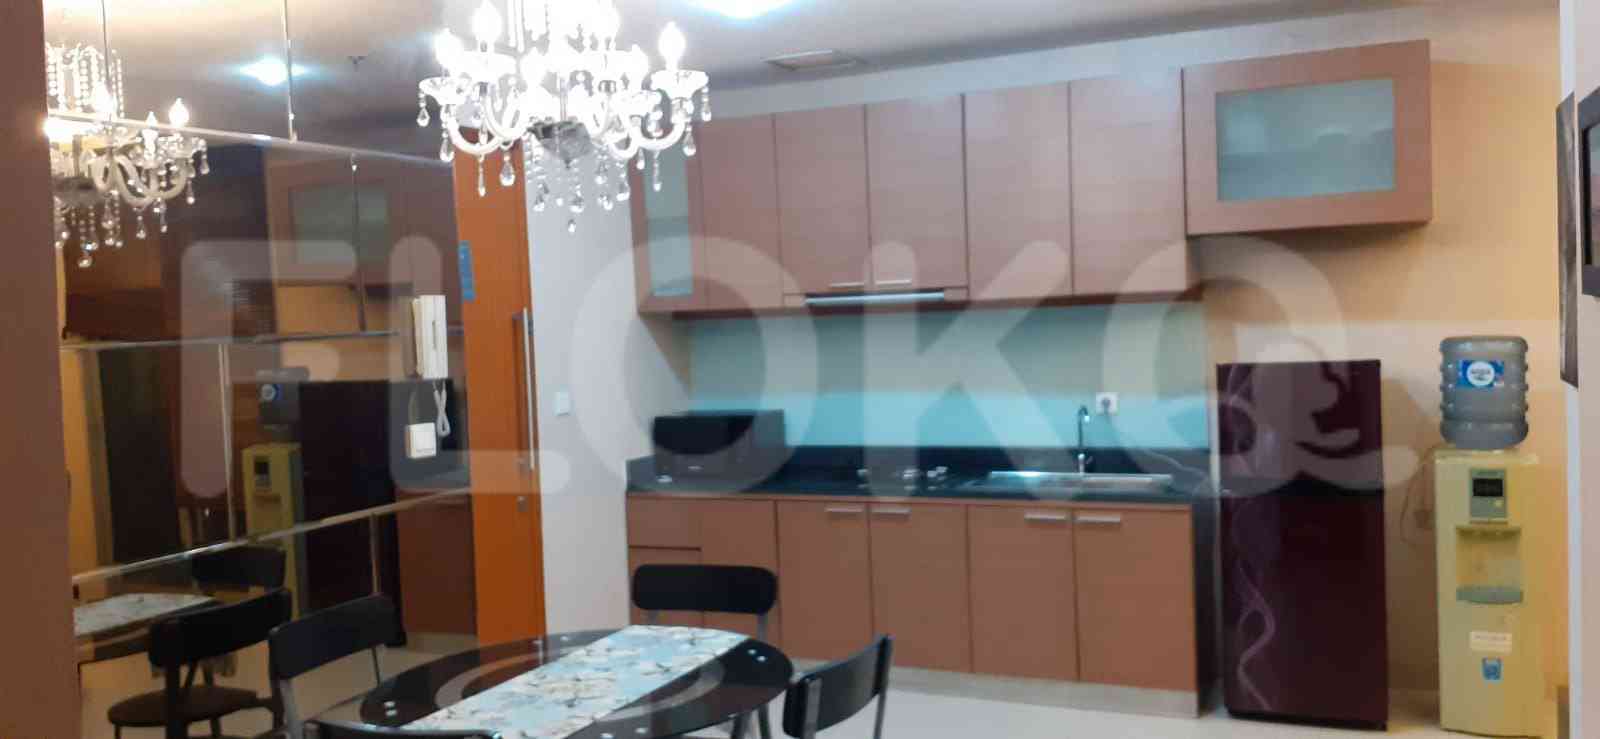 2 Bedroom on 2nd Floor for Rent in Kuningan Place Apartment - fku1f5 6